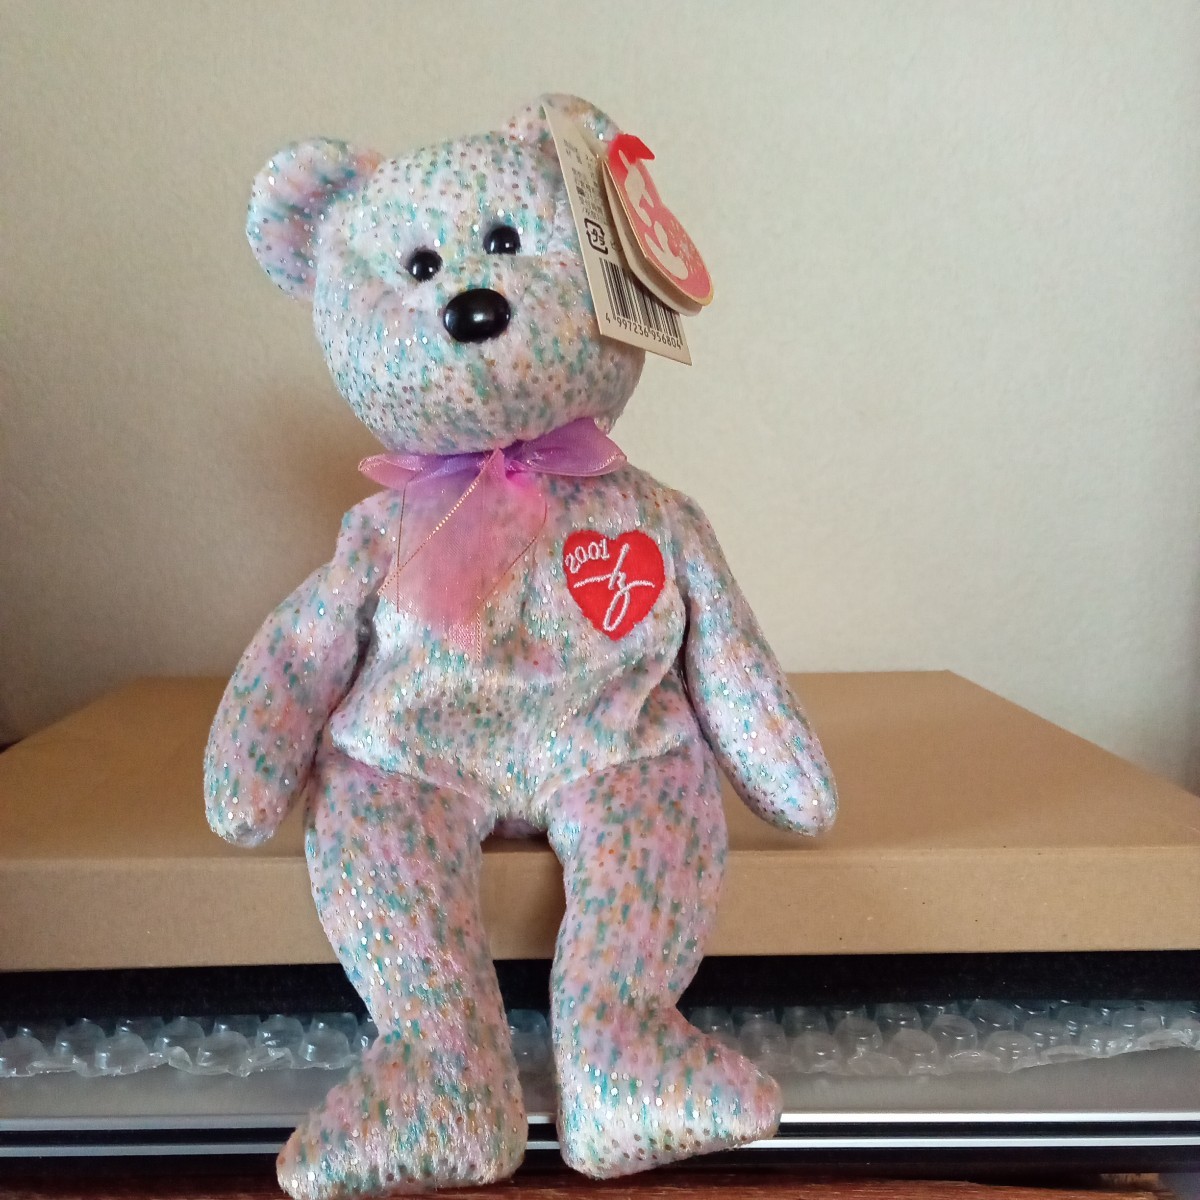  valuable!ty Beanie babes soft toy 2001 memory be arc ma bear 